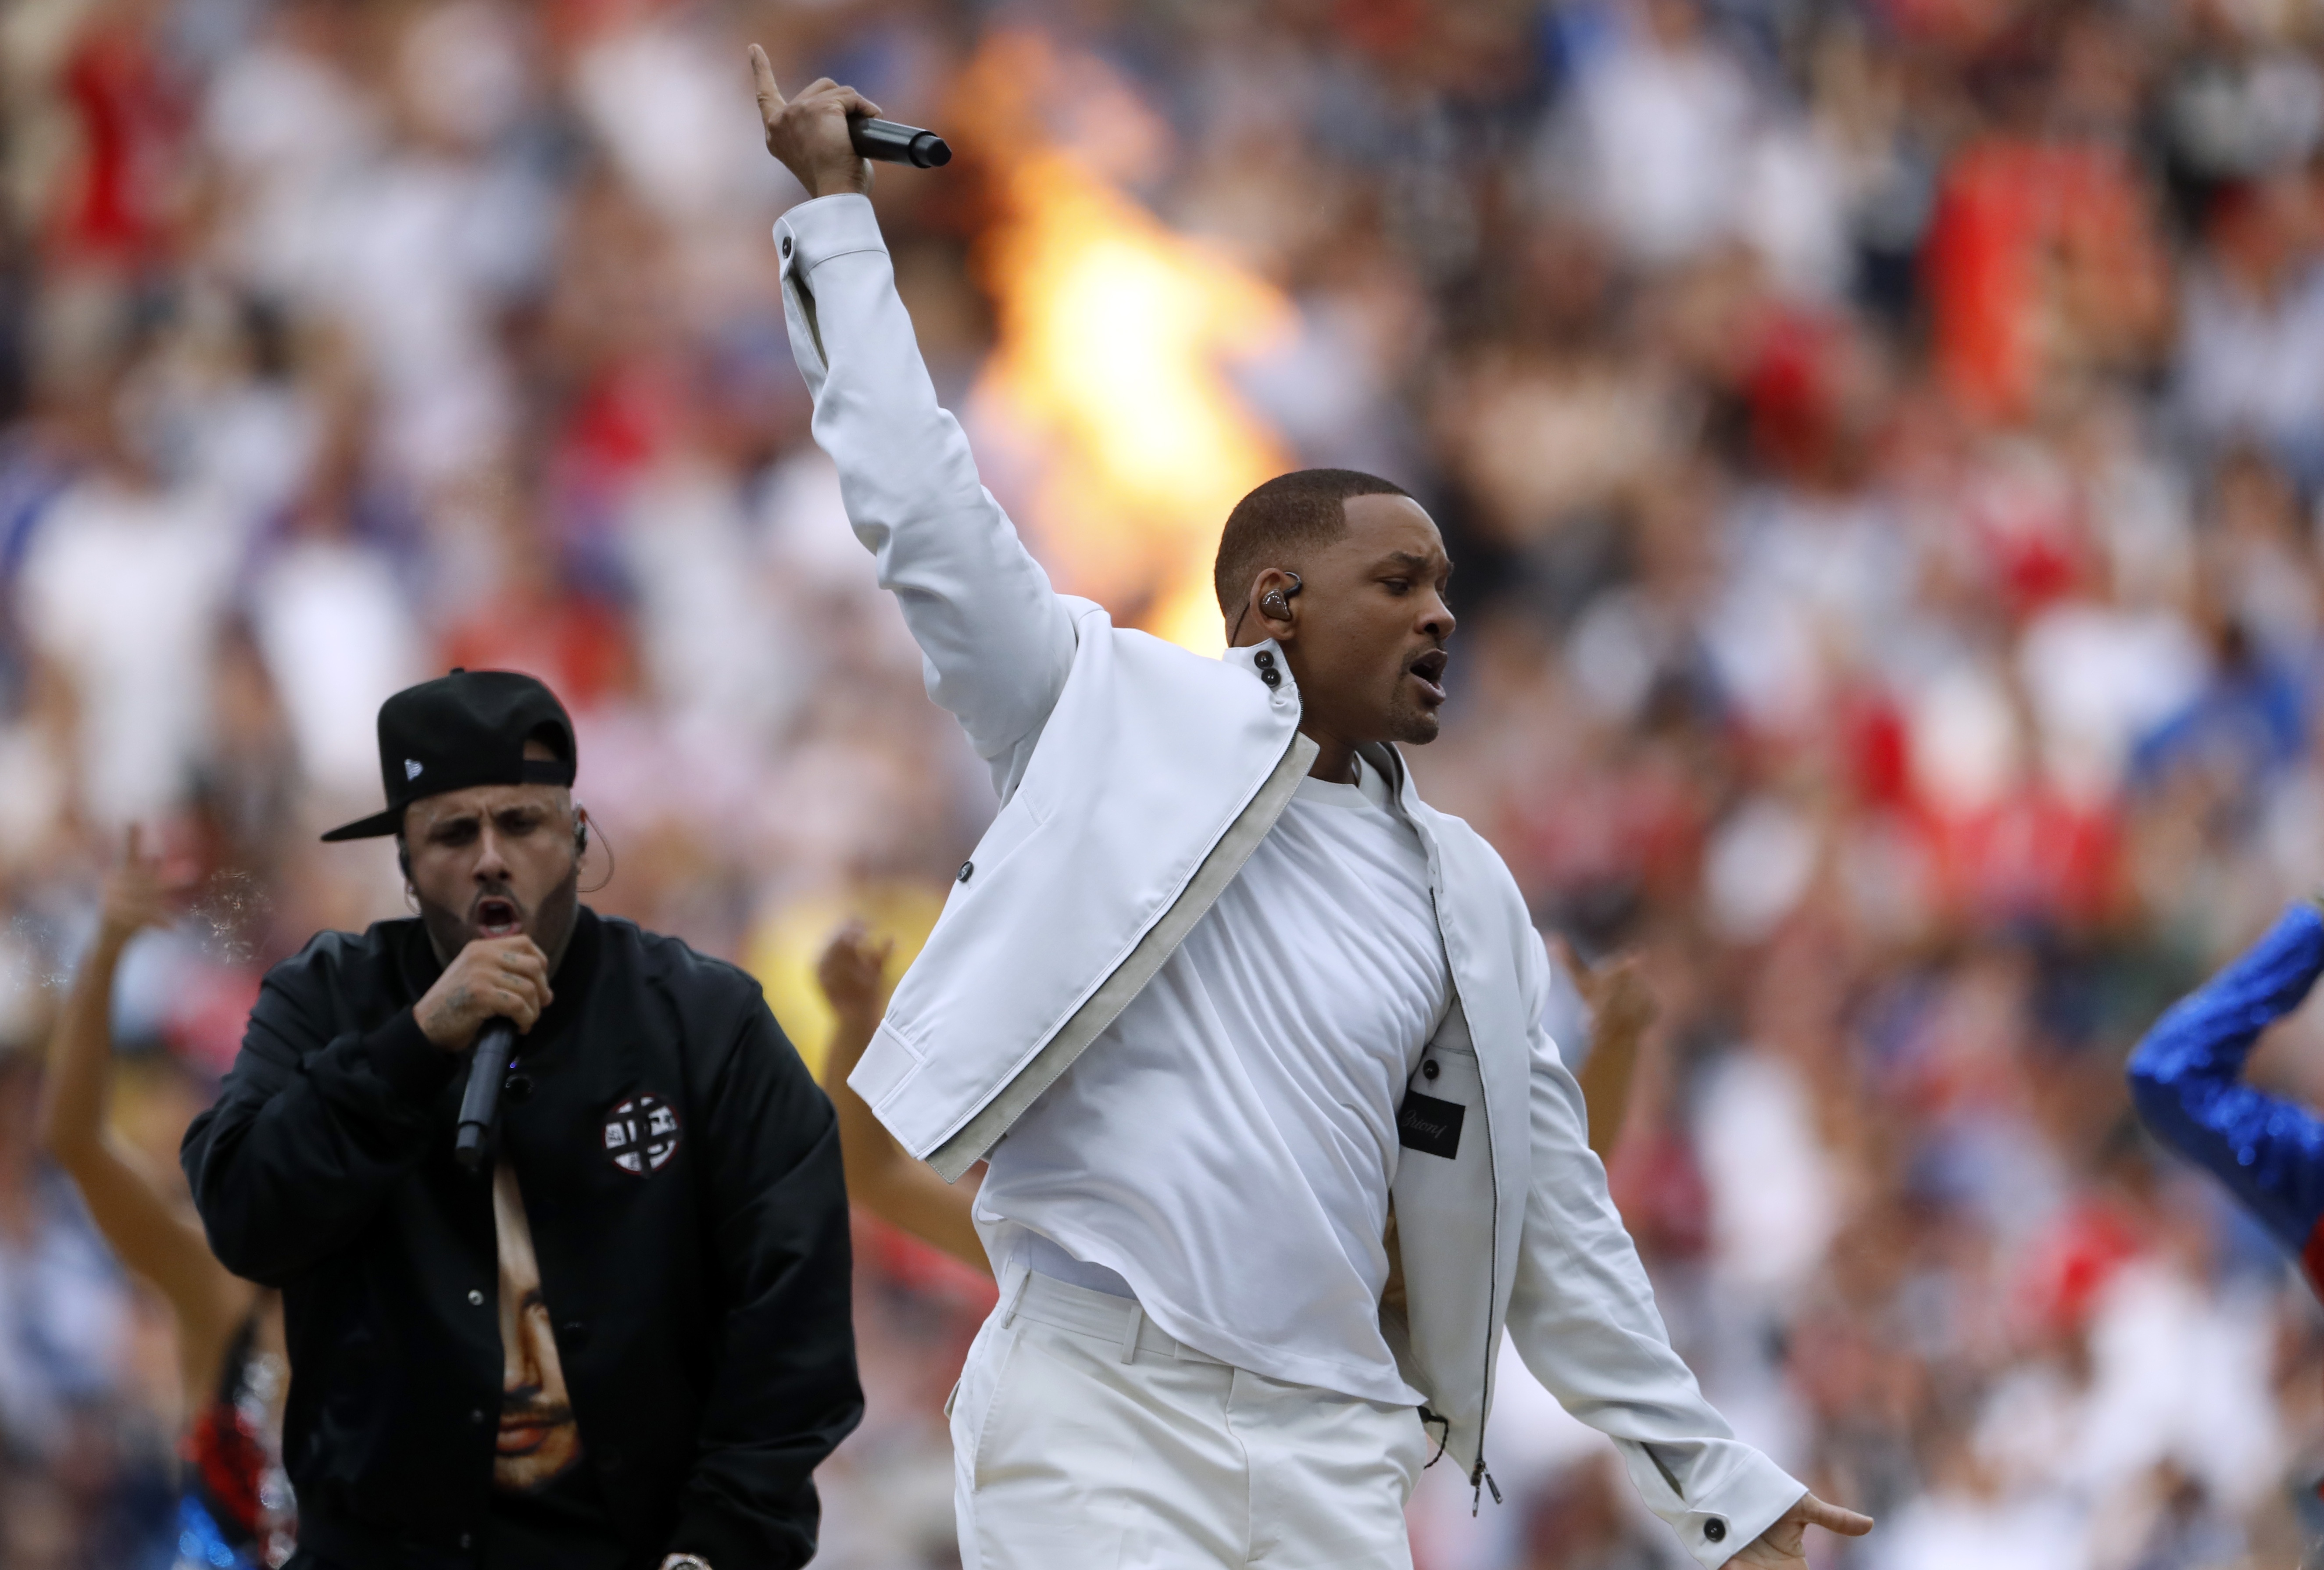 Will Smith performs during a ceremony prior to the final match between France and Croatia at the 2018 soccer World Cup in the Luzhniki Stadium in Moscow - AP